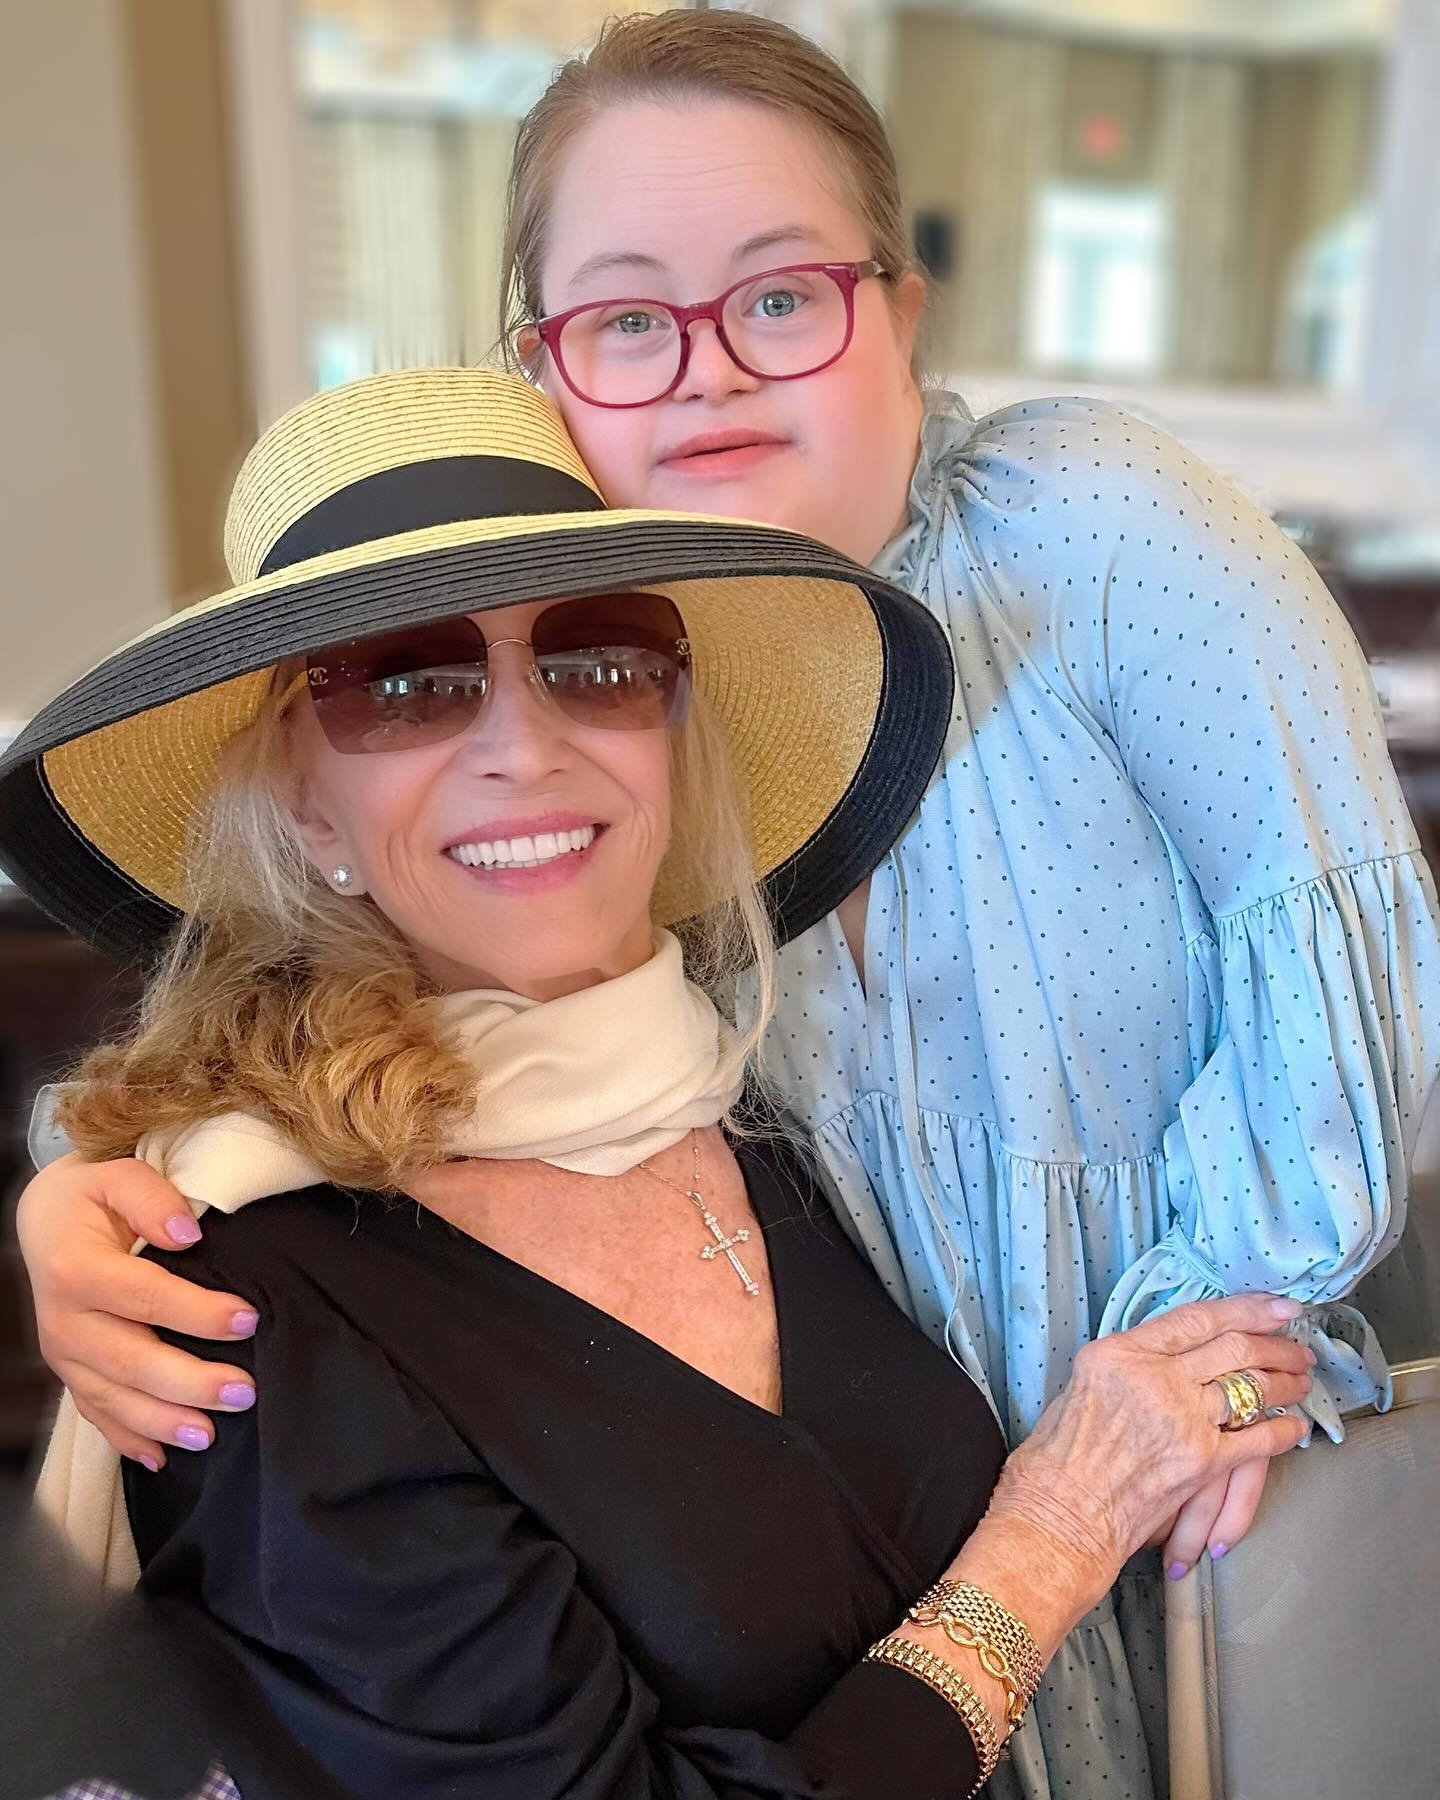 Grace and her Mimi 🌸🩷

Yesterday at our family&rsquo;s Mother&rsquo;s Day brunch Grace wanted lots of pics. Fun fact, Grace calls Mimi &ldquo;Sunshine&rdquo; and Granddaddy &ldquo;Frances&rdquo; (last pic). He calls her Freddy. Haha. If someone say